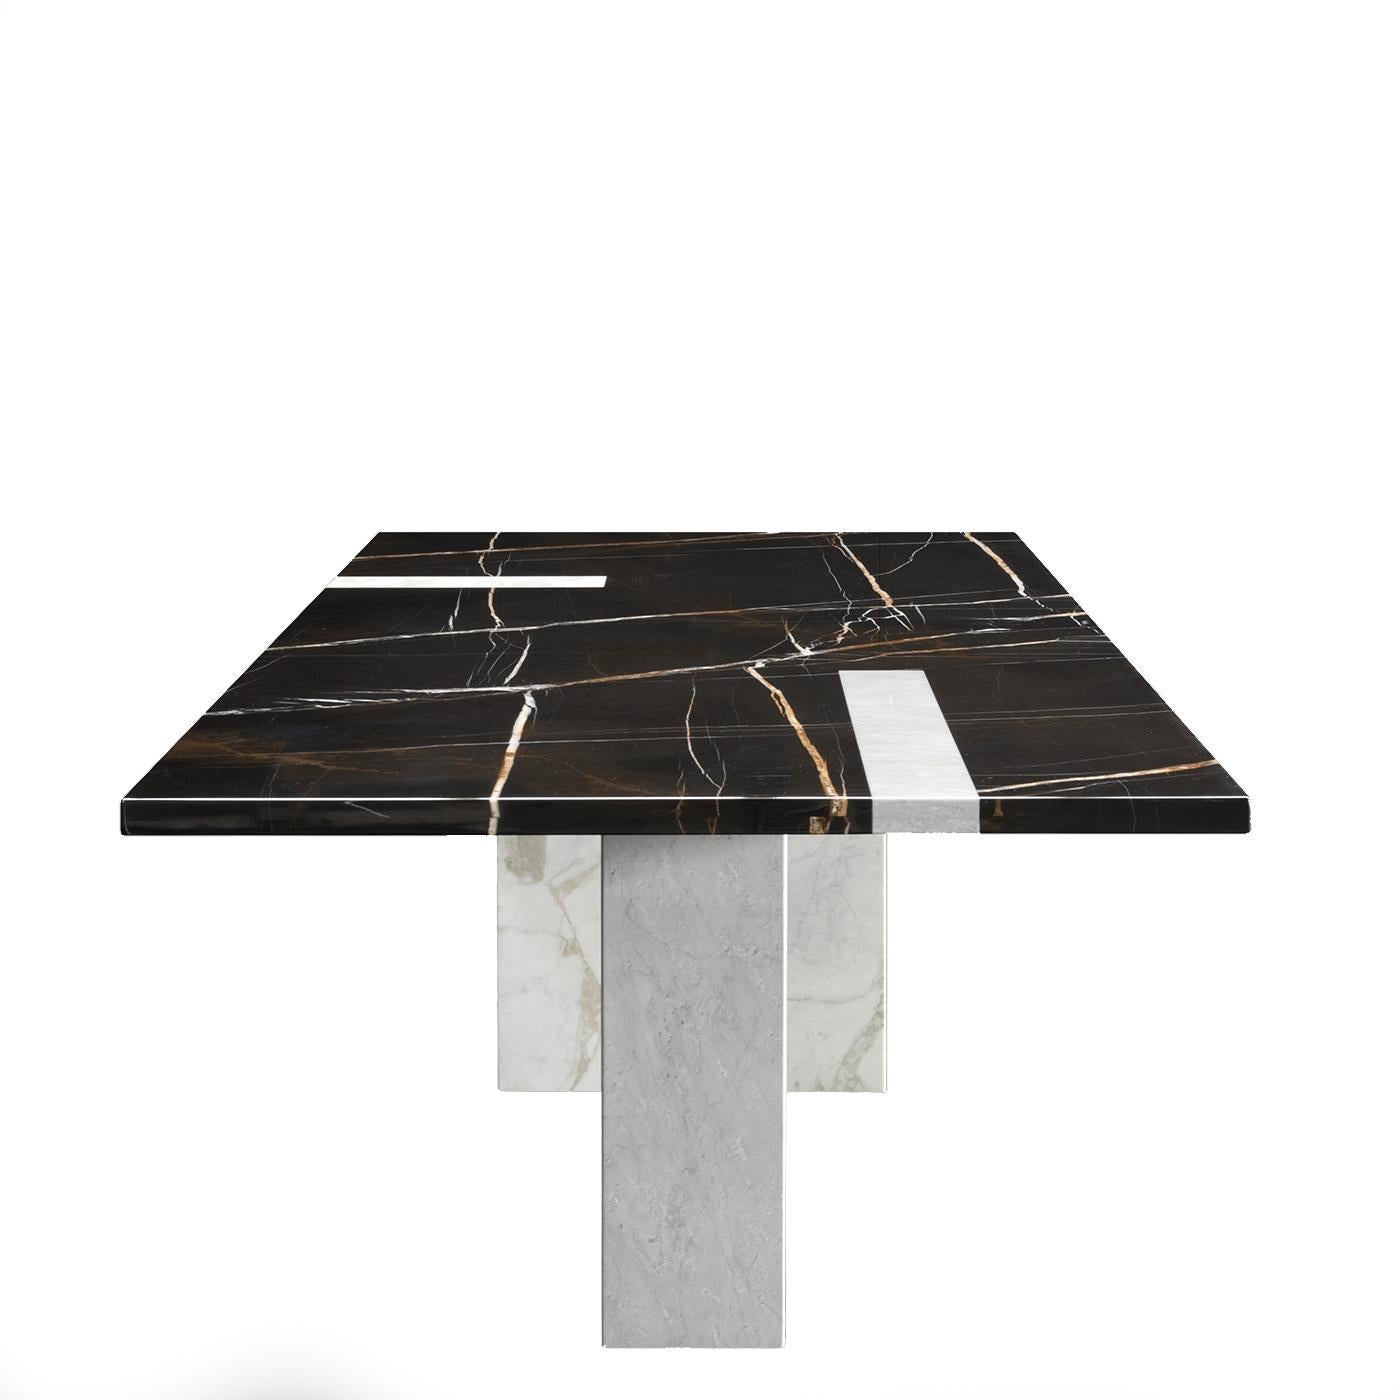 Two-tone means twice the luxury in the urban marble dining table by Giorgio Soressi. With a young silhouette, this version of the table is characterized by its juxtaposition of Sahara Noir with Grigio Carrara and Arabescato Vagli. The table,